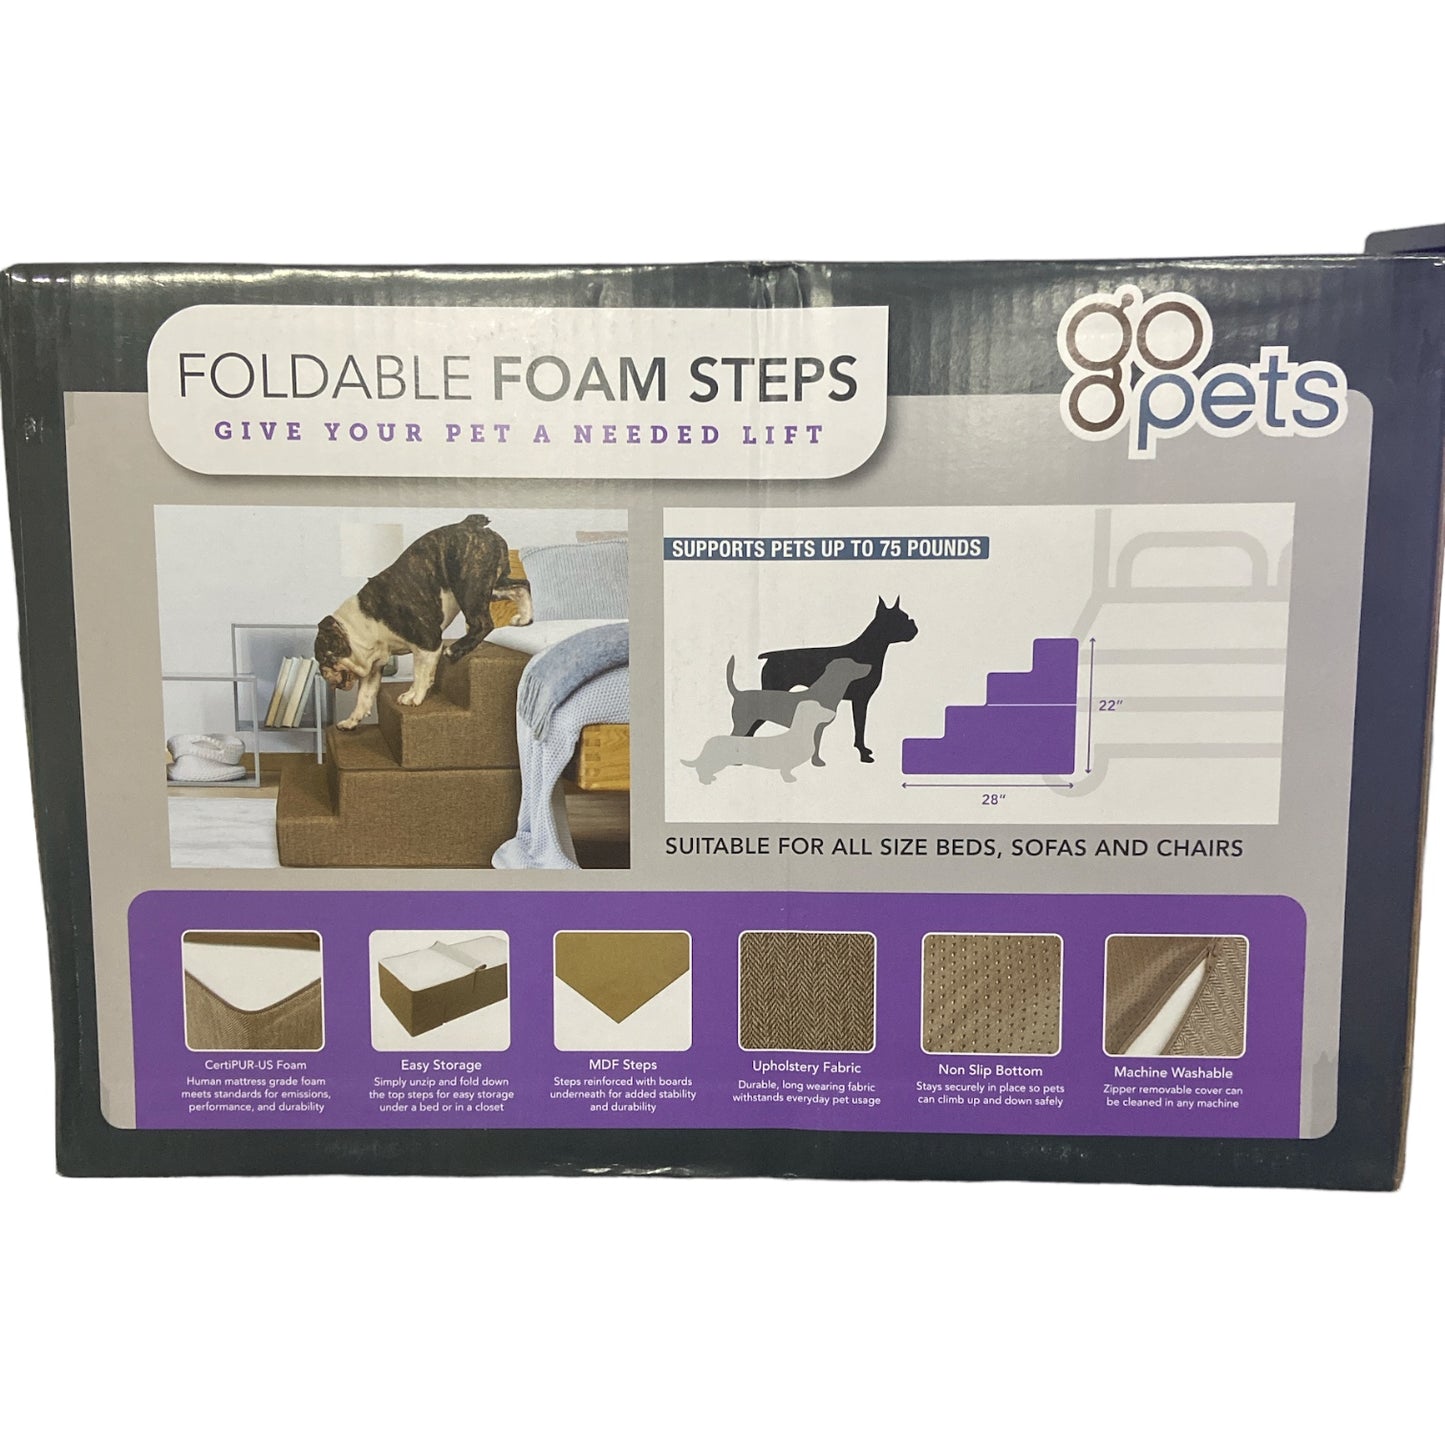 Foldable Foam Steps by Go Pets - Non Slip, Machine Washable and Up to 75lbs